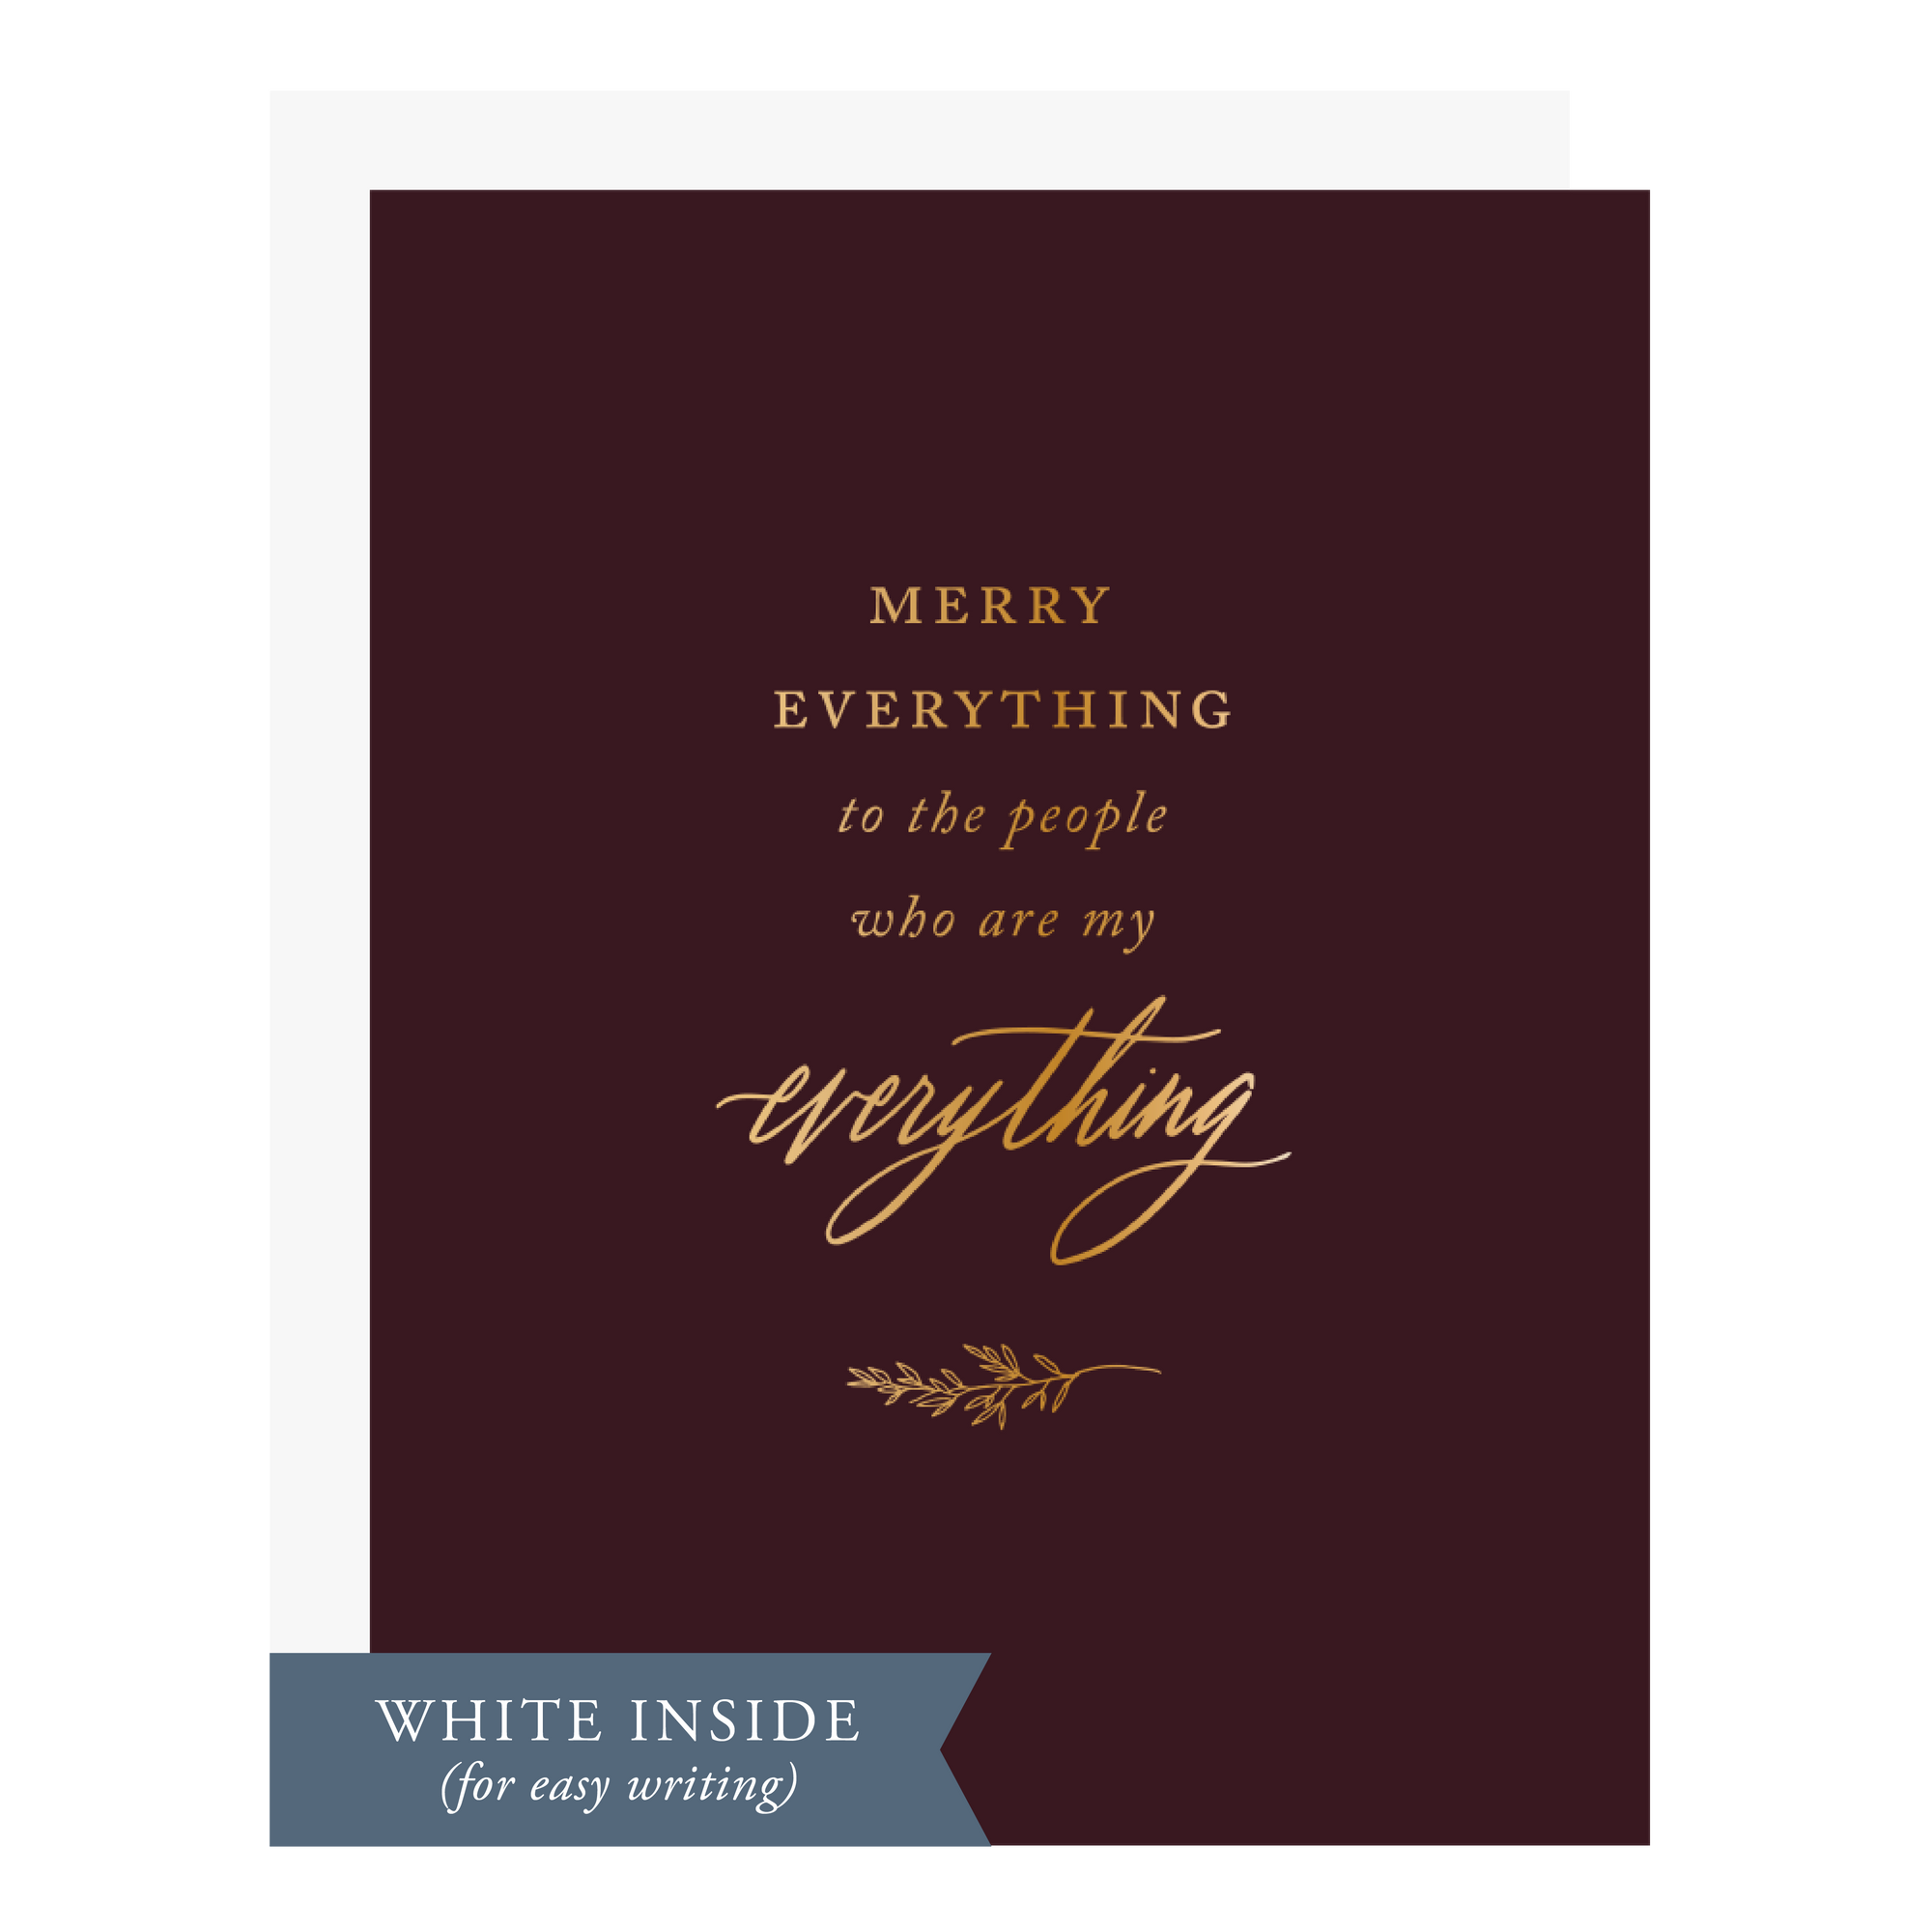 "Merry Everything" card, letterpress printed by hand in gold foil.